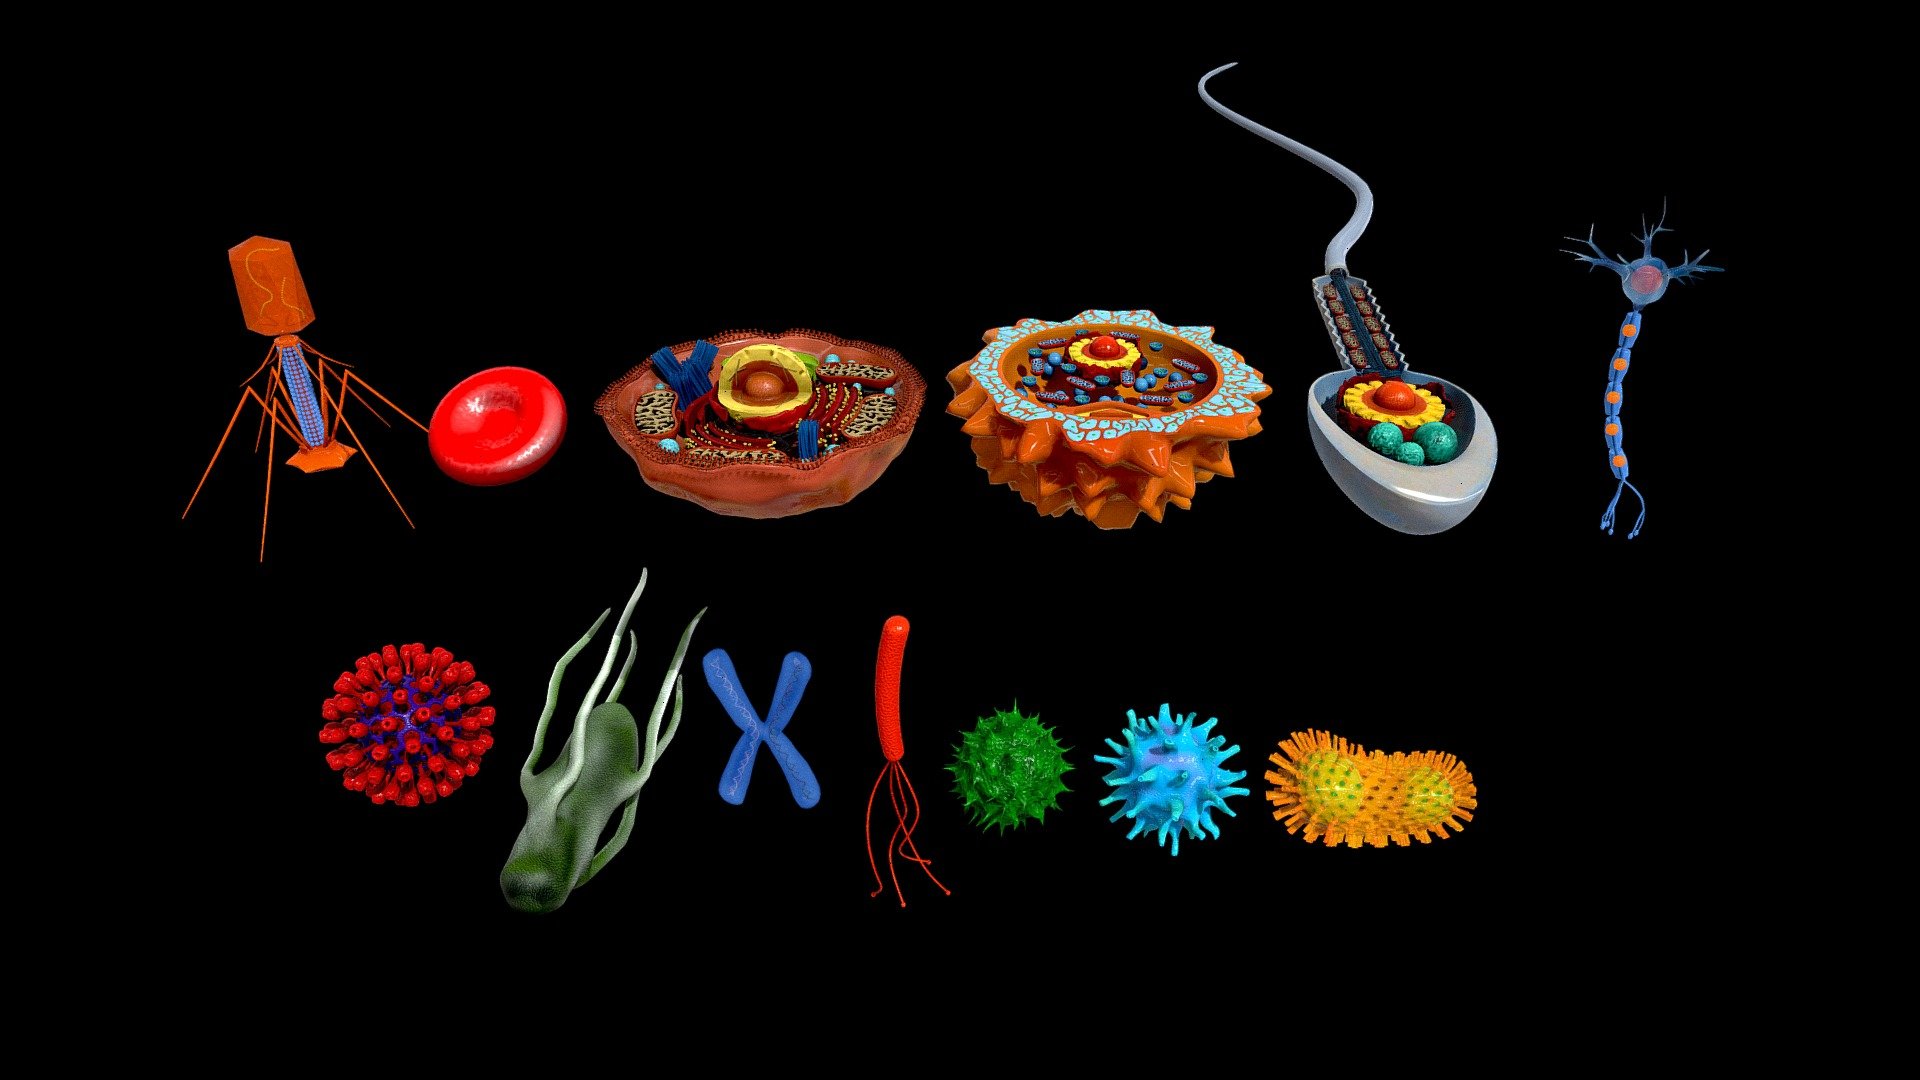 High detailed 3d Microscopic Collection 13 in 1
Products in Collection:




Bacteriophage Virus

Erythrocytes Red Cell

Human Cell

Human Egg Cell/ Ovum

Human Sperm Cell

Neuron cell

Virus

Salmonella

Chromosome

Flagella

Green Bacterium

Bacterium Blue

Bacillus bacteria

Available in ARLOOPA App - https://app.arloopa.com - 3D microscopic collection - Buy Royalty Free 3D model by arloopa 3d model